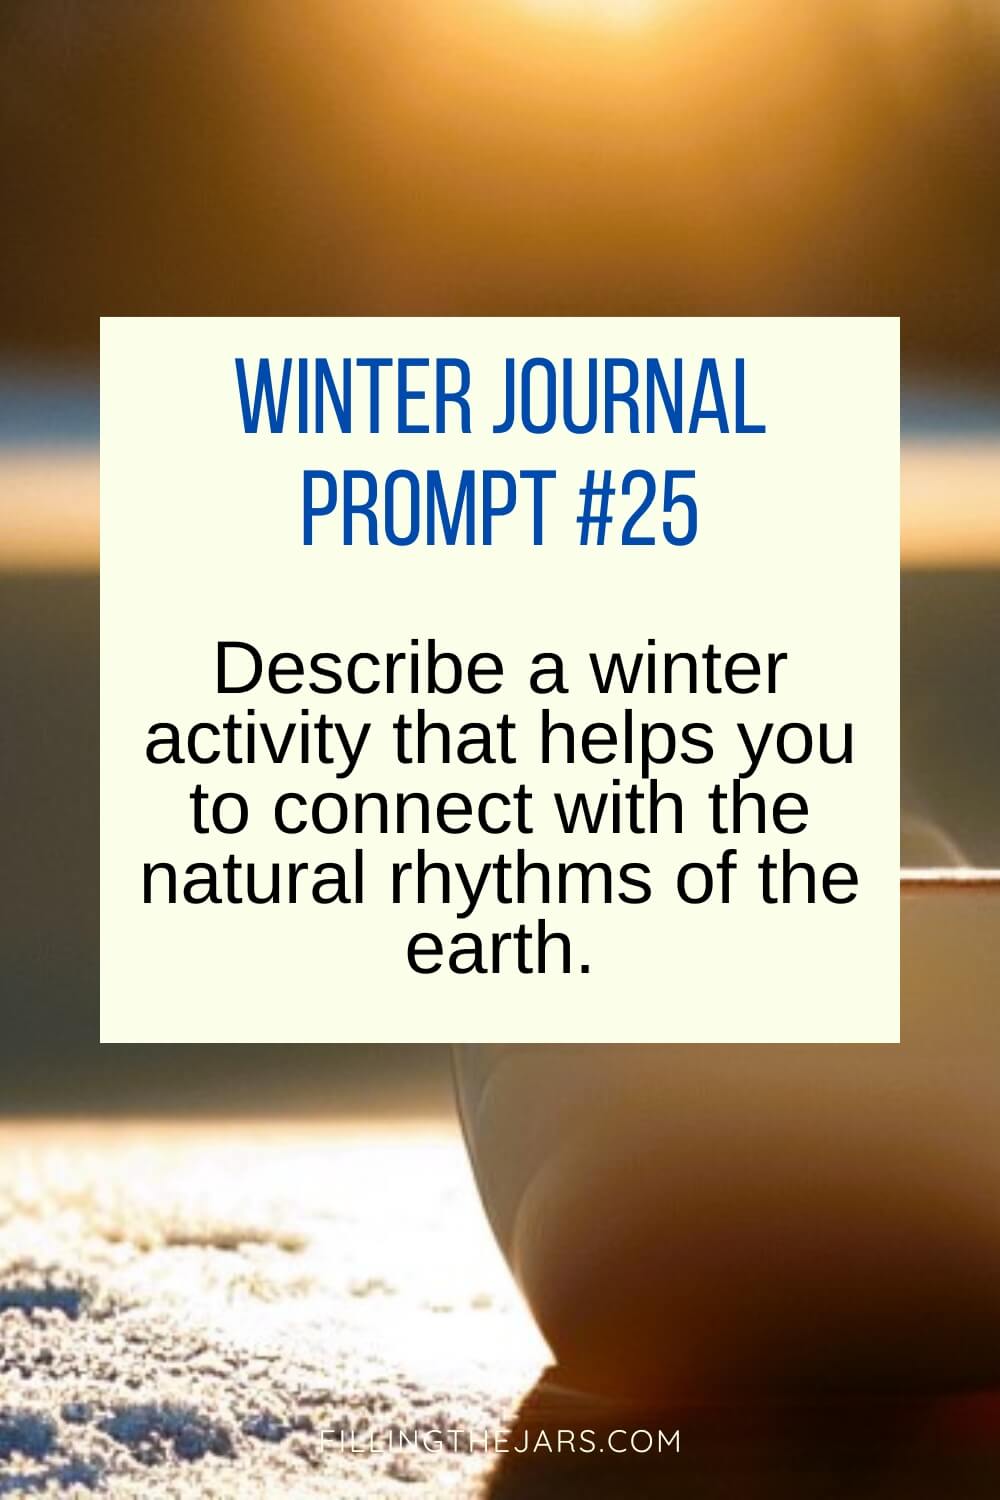 Connect with the natural rhythms of the earth winter journal prompt over sunny outdoor winter scene with snow and coffee mug.